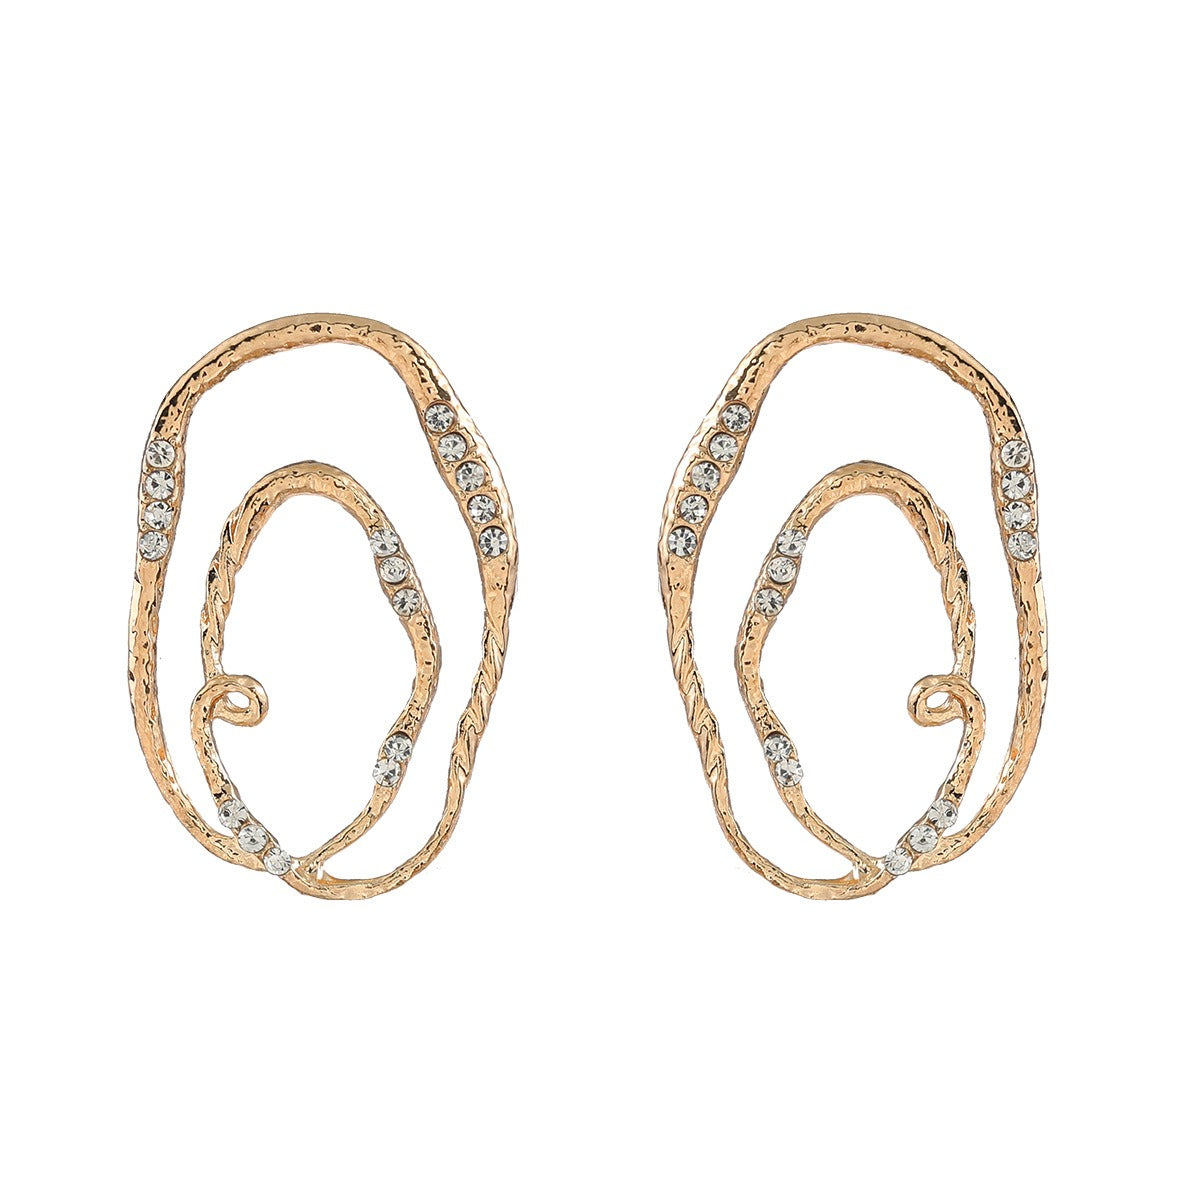 Alloy Multi-Layer Elliptical Exaggerated Earrings